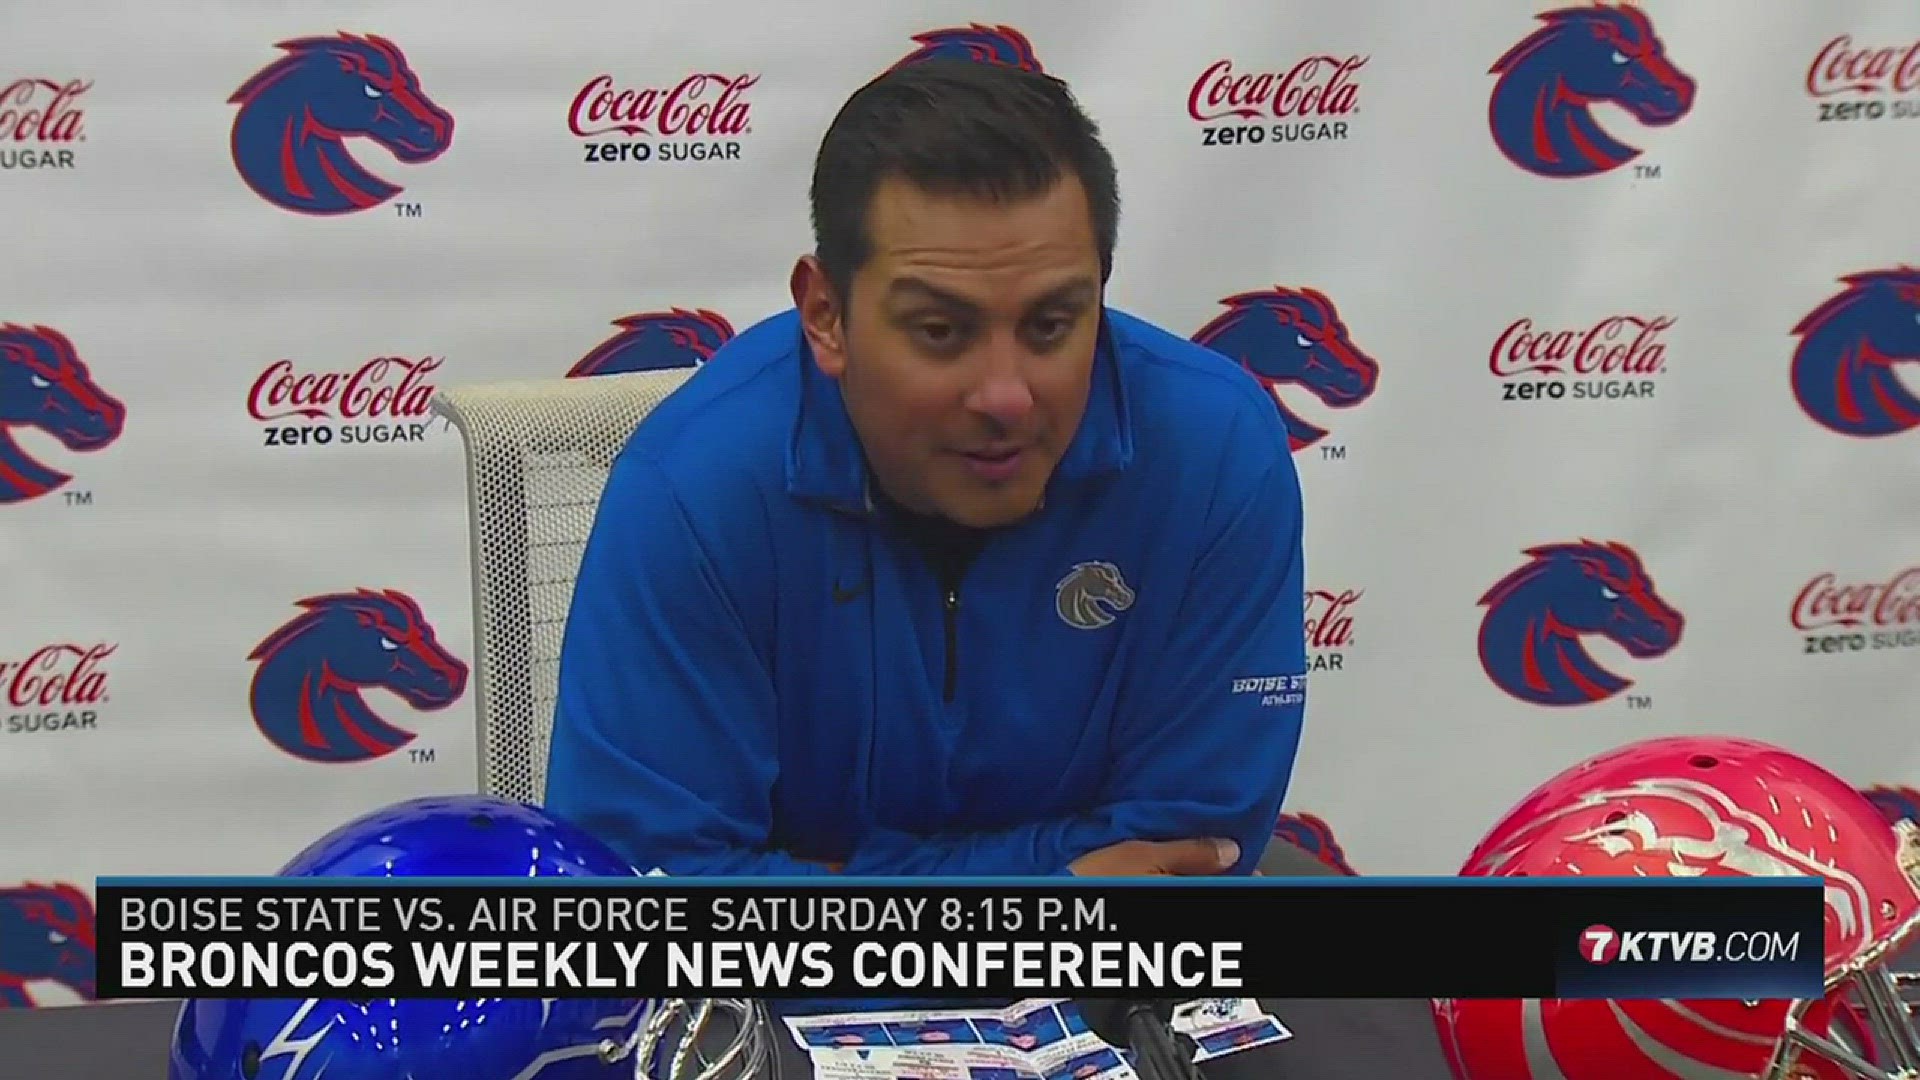 Boise State defensive coordinator Andy Avalos talks about the challenges facing his team as they prepare for Saturday's game against Air Force.